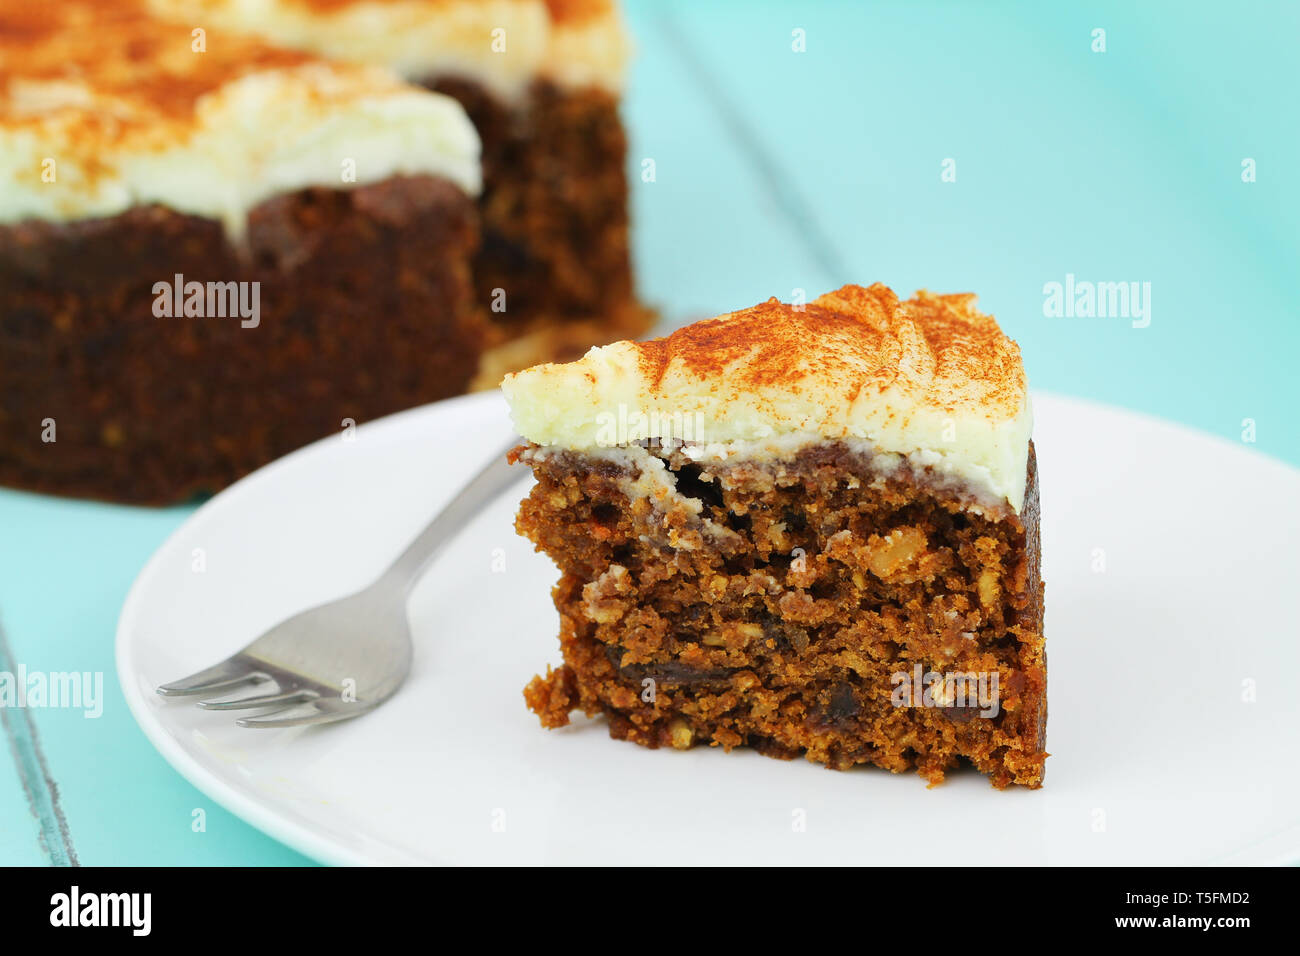 Slice of delicious carrot cake with walnuts on white plate Stock Photo